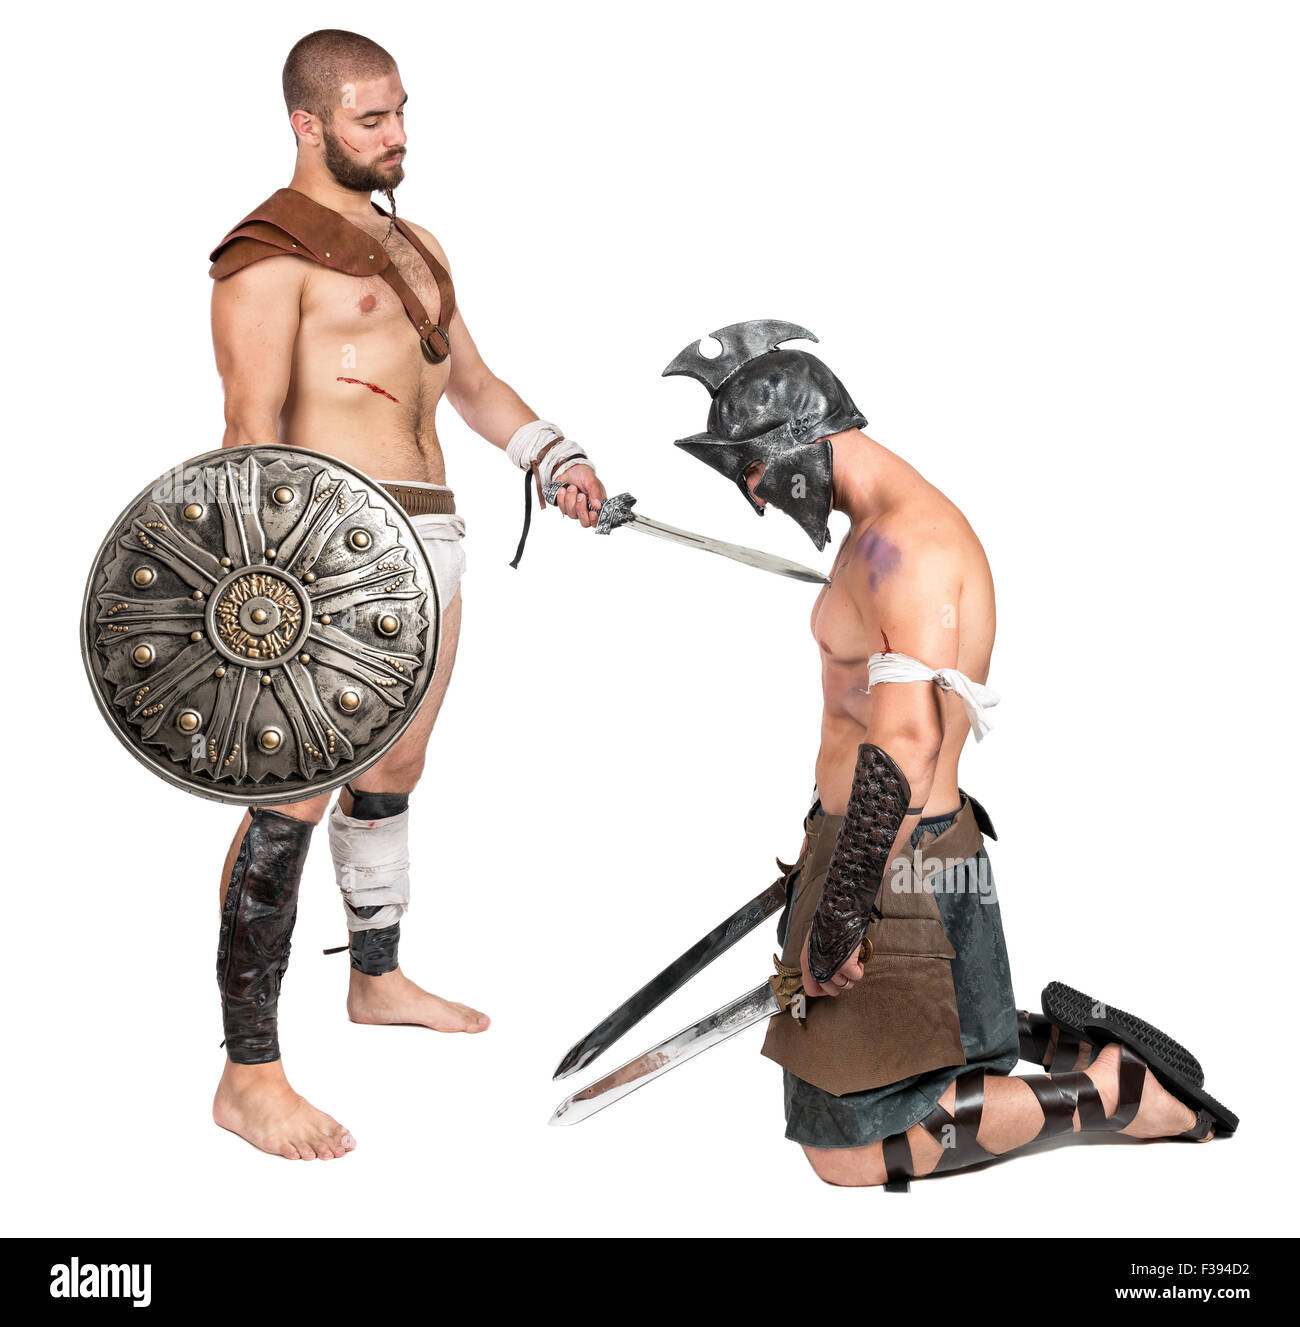 [IMAGE:https://c8.alamy.com/comp/F394D2/gladiator-ending-opponent-isolated-in-a-white-background-F394D2.jpg]